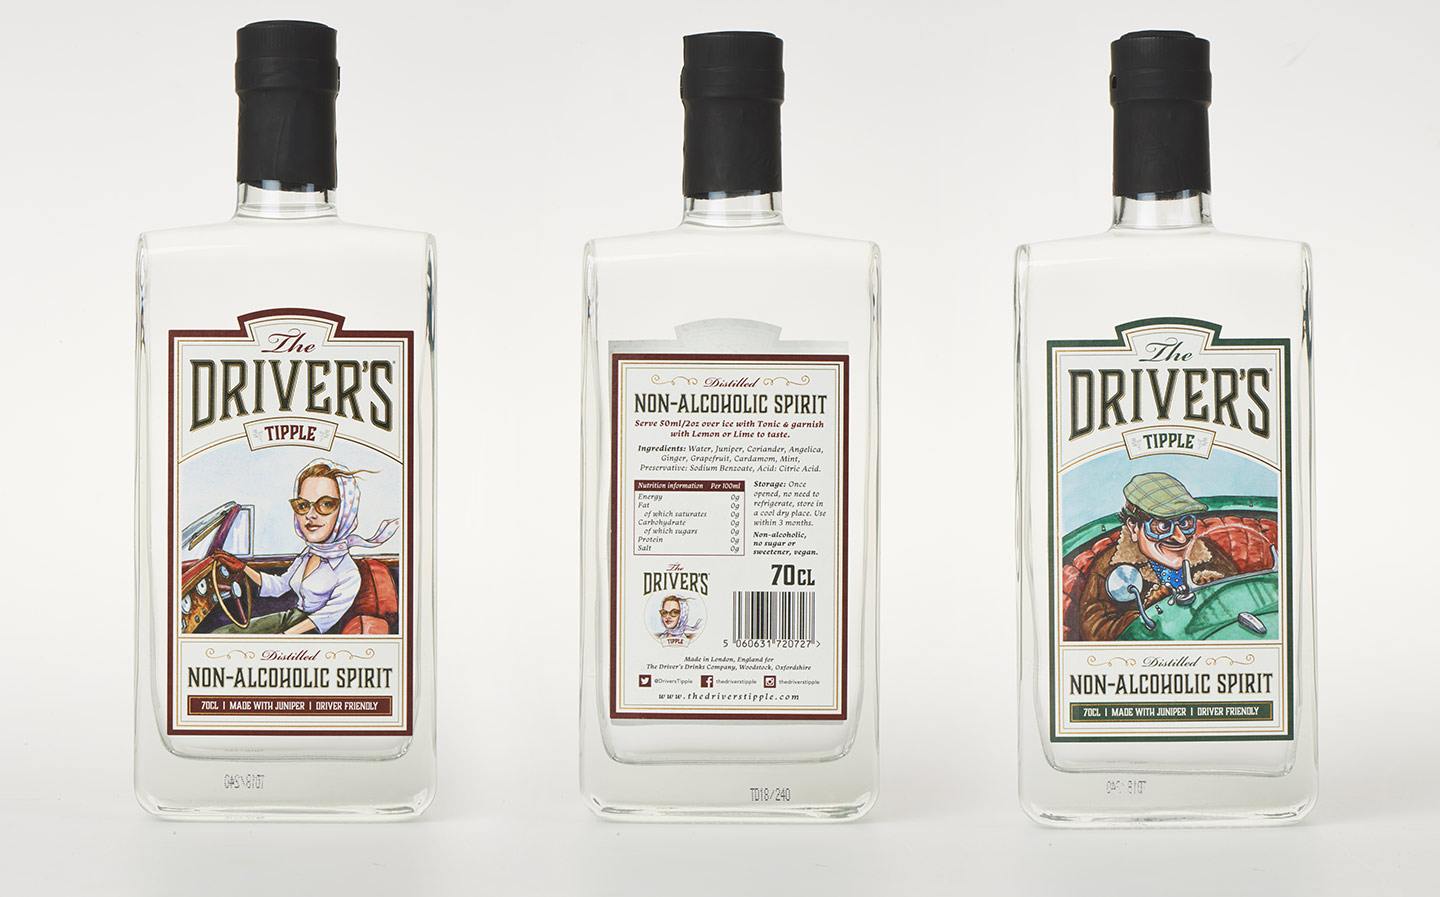 The Driver's Tipple non-alcoholic spirit review